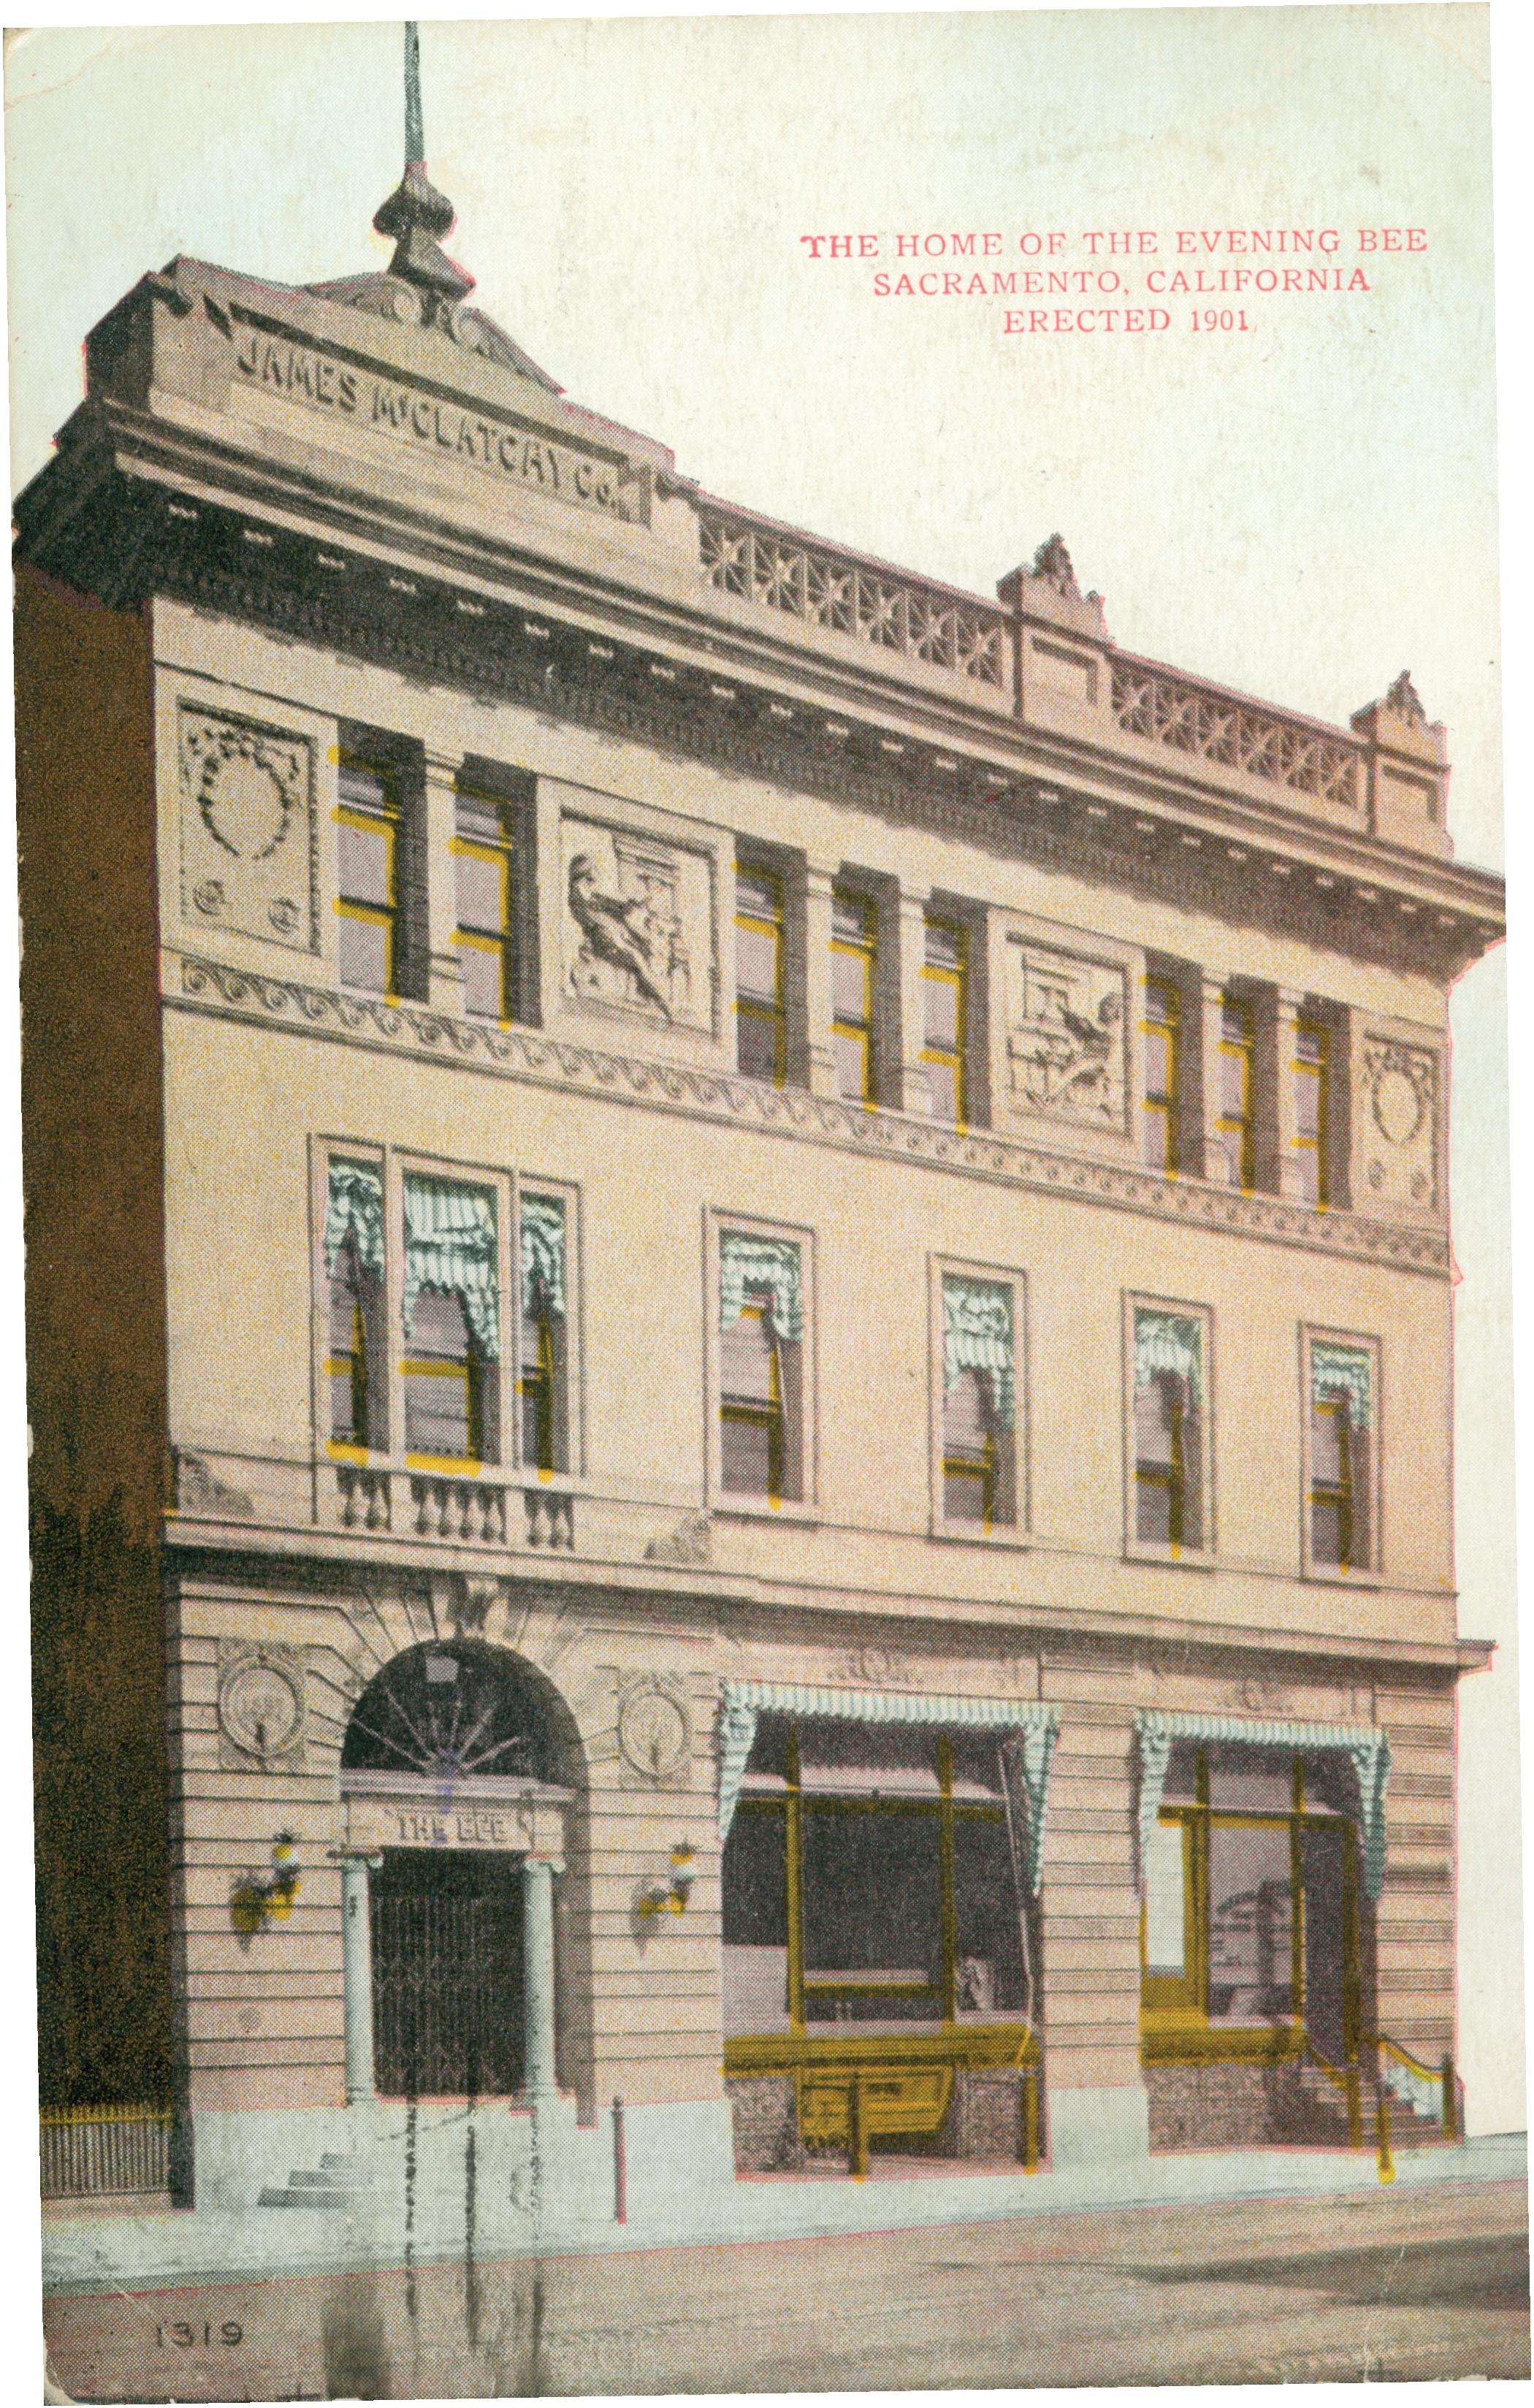 This postcard shows the exterior of the State Printing Office and its grounds.